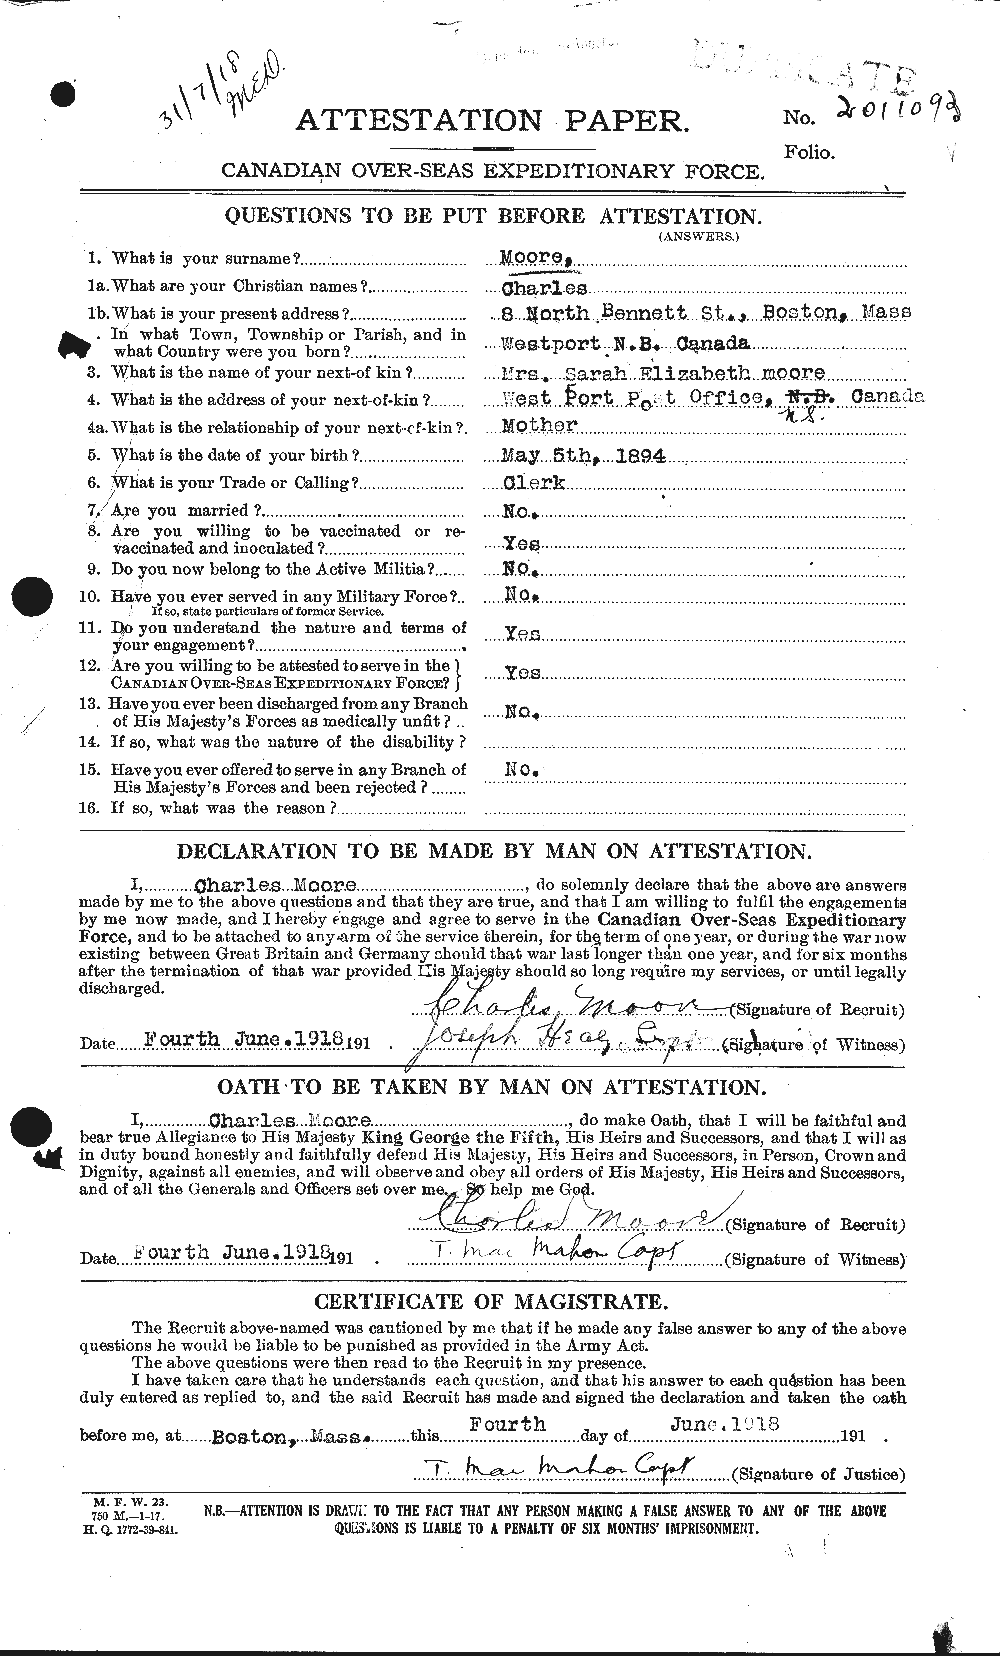 Personnel Records of the First World War - CEF 506479a